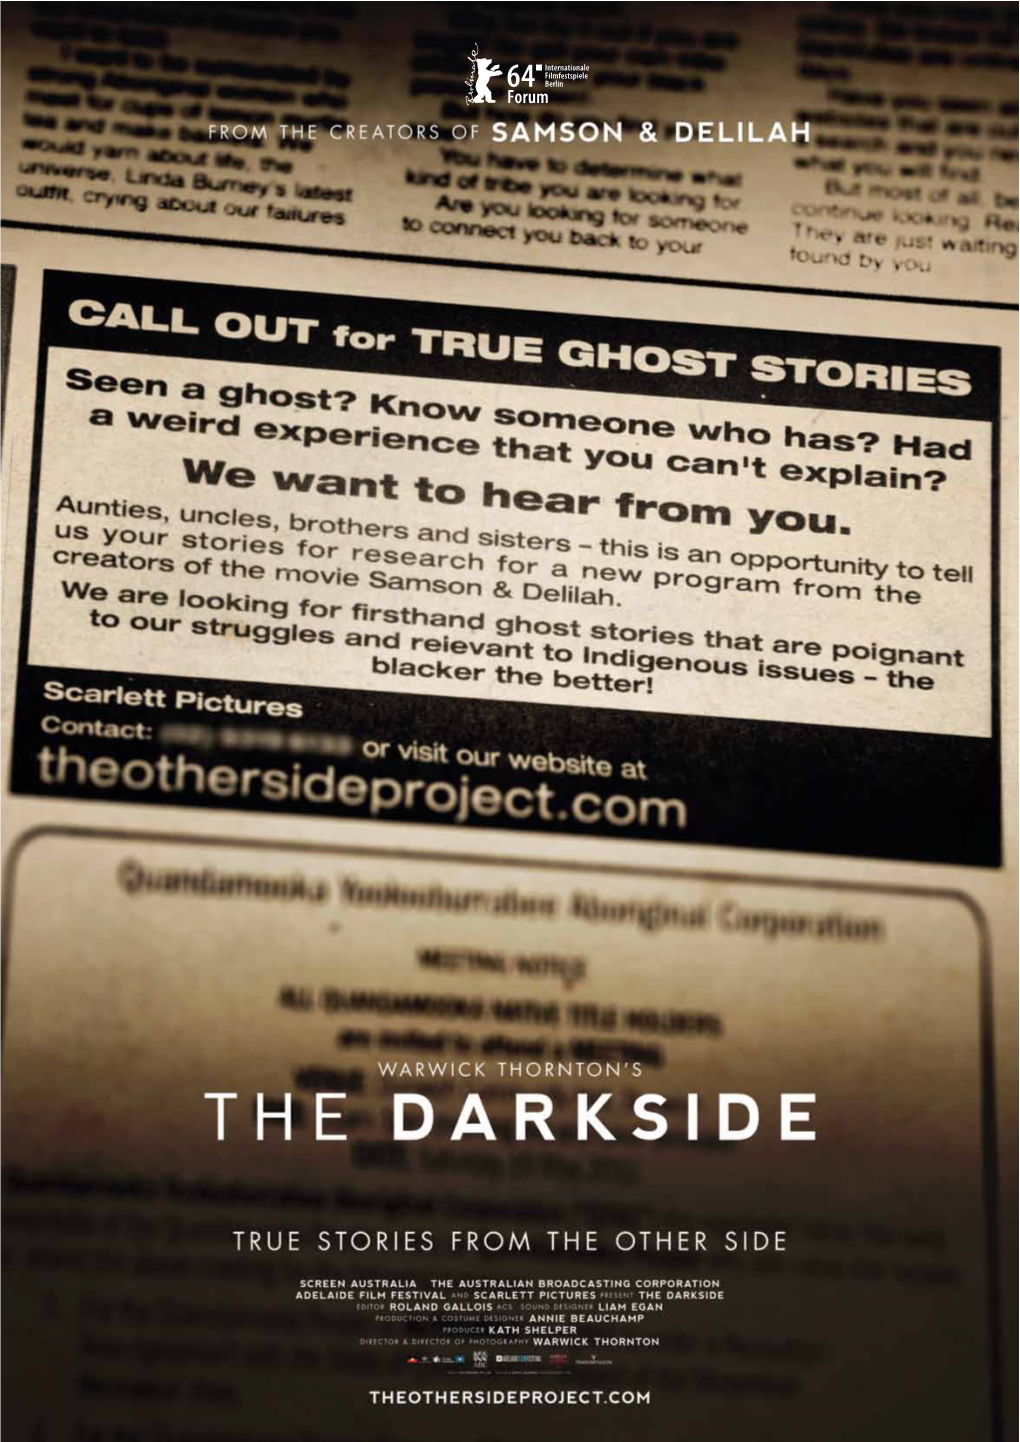 Darkside True Stories from the Other Side…